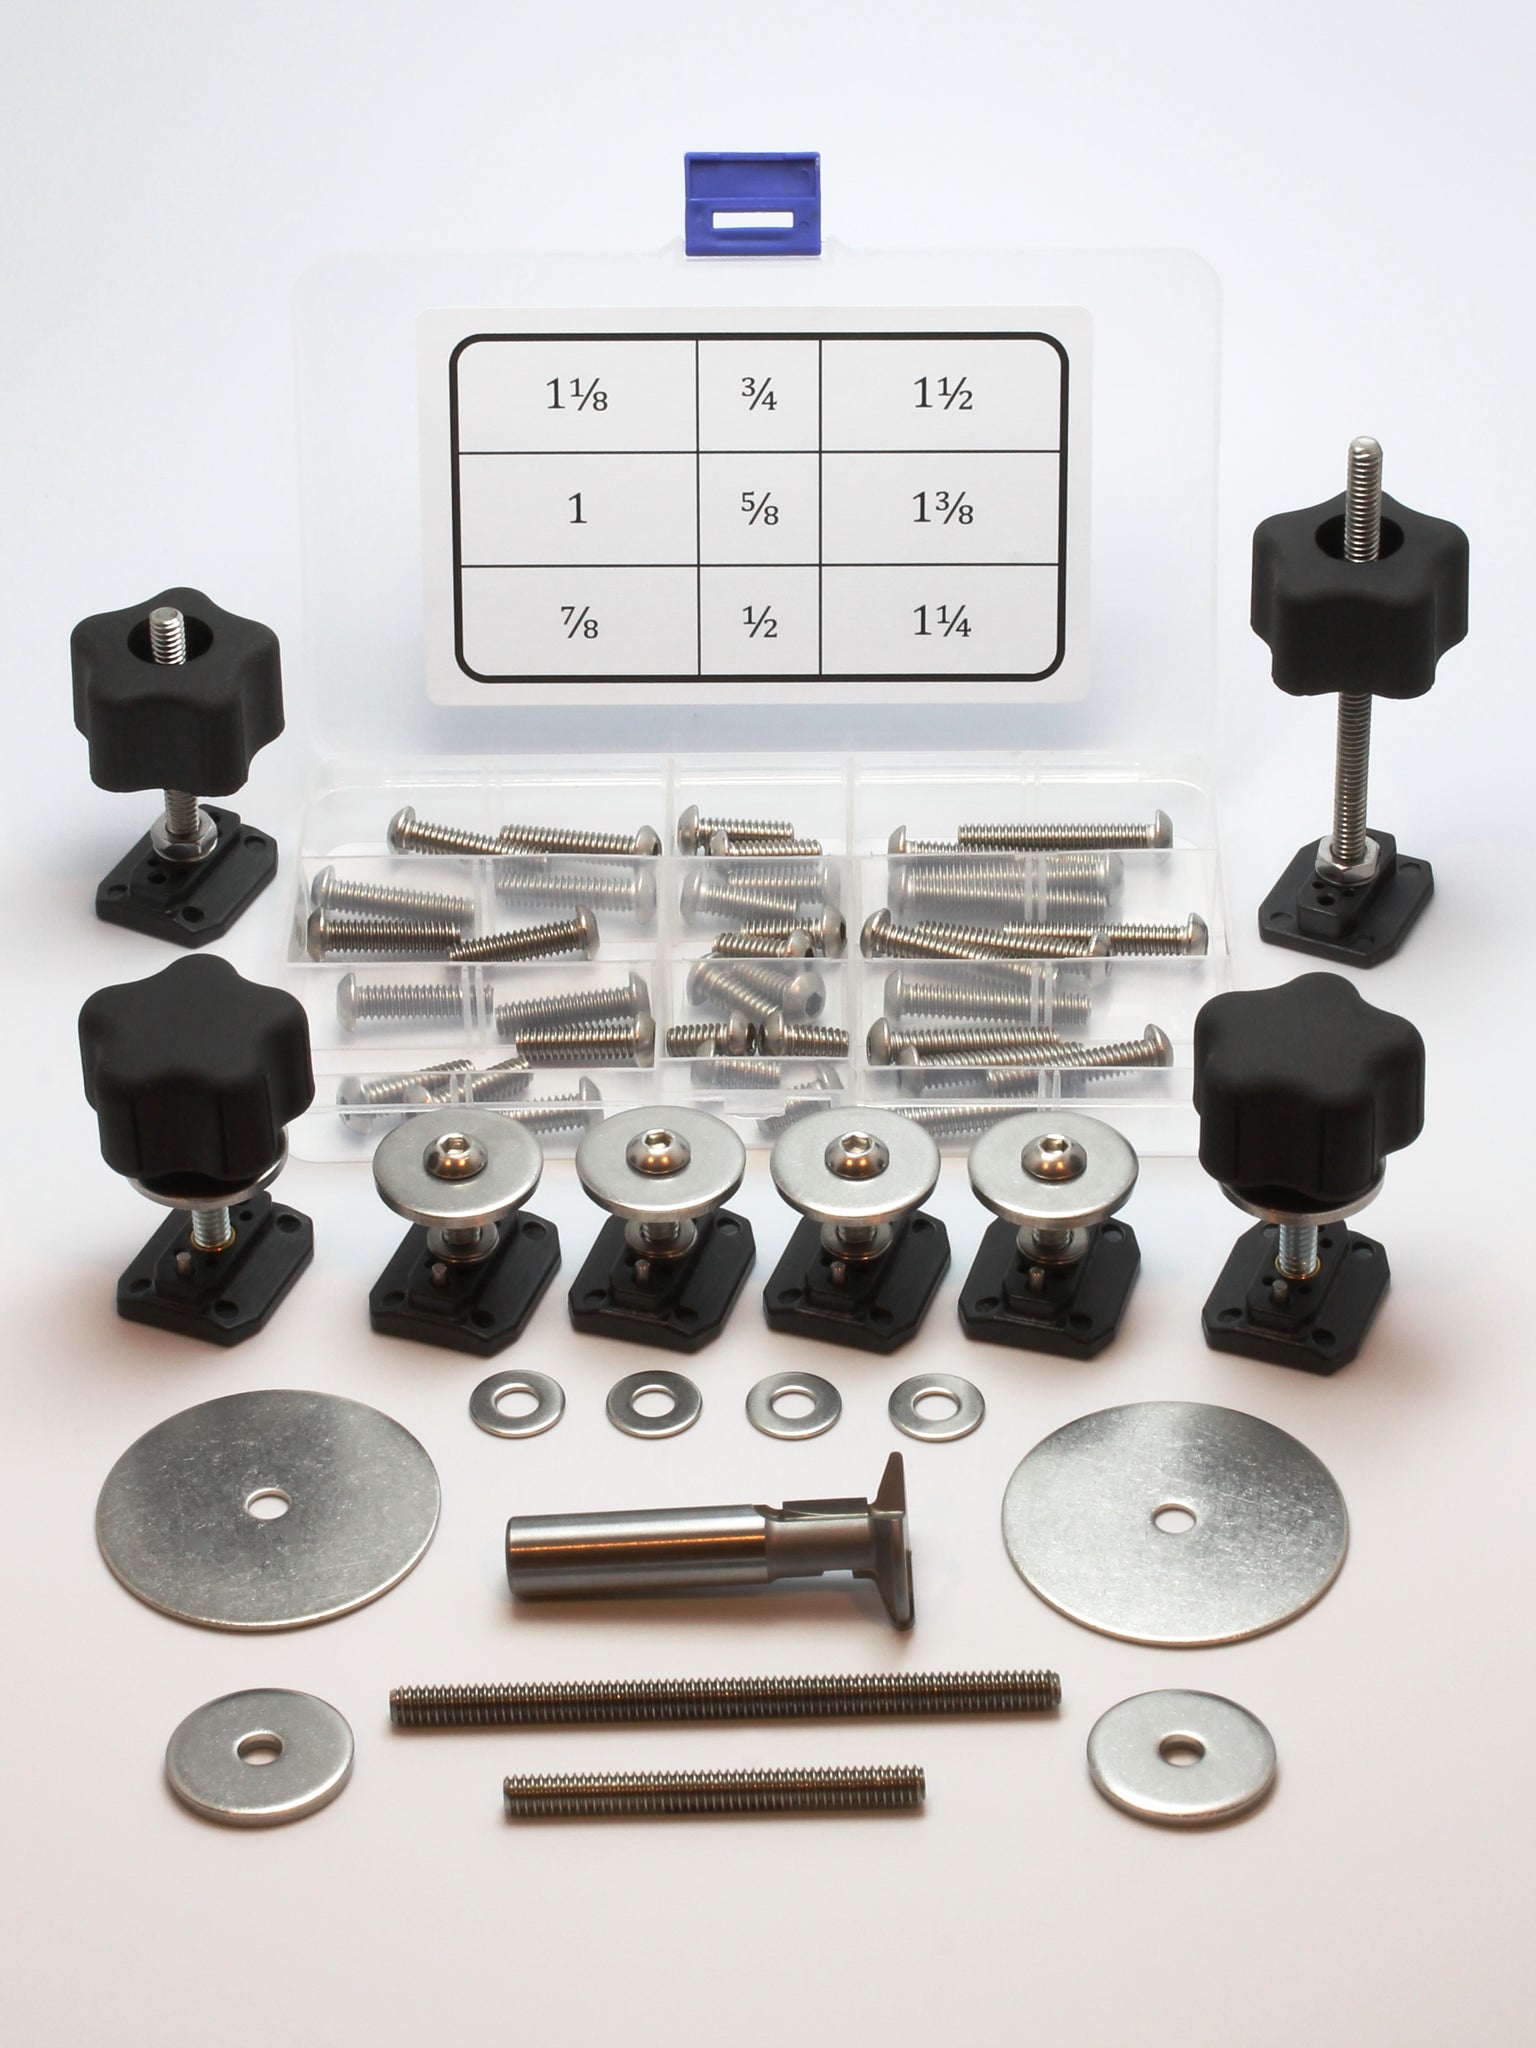 A WoodAnchor Premium Starter Kit includes all of the components shown in this photo